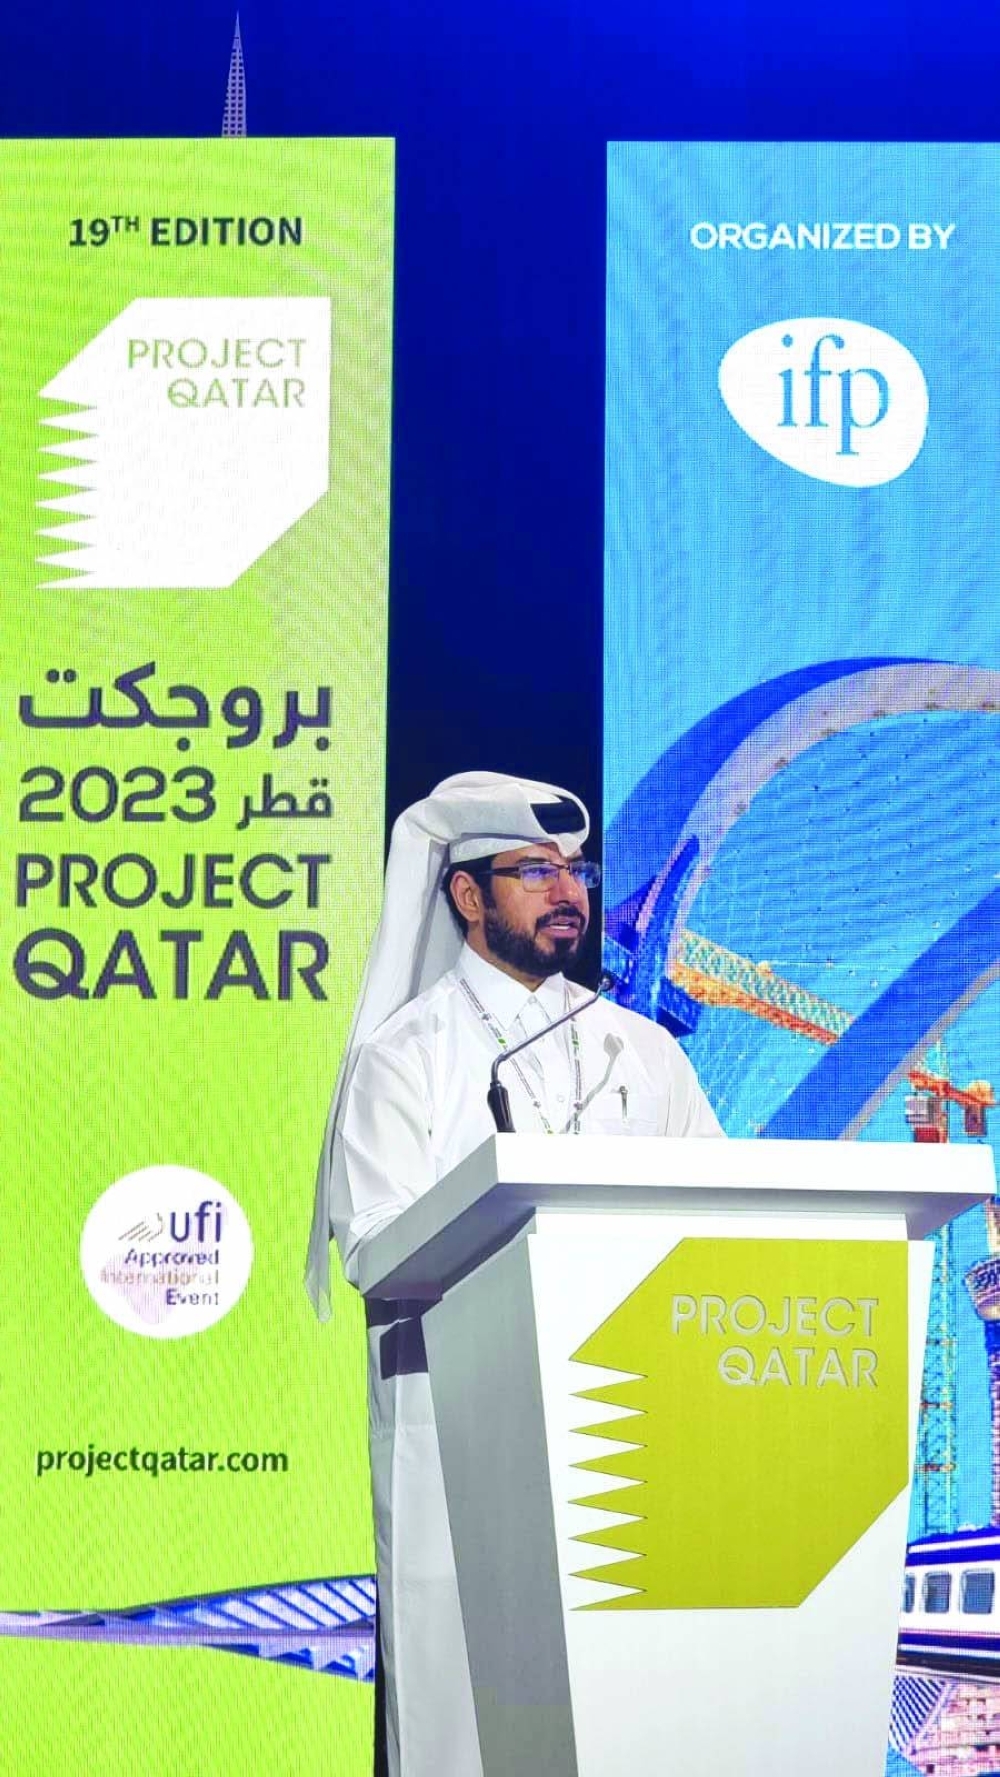 Saud al-Tamimi addressing the opening session of Project Qatar 2023 Monday.